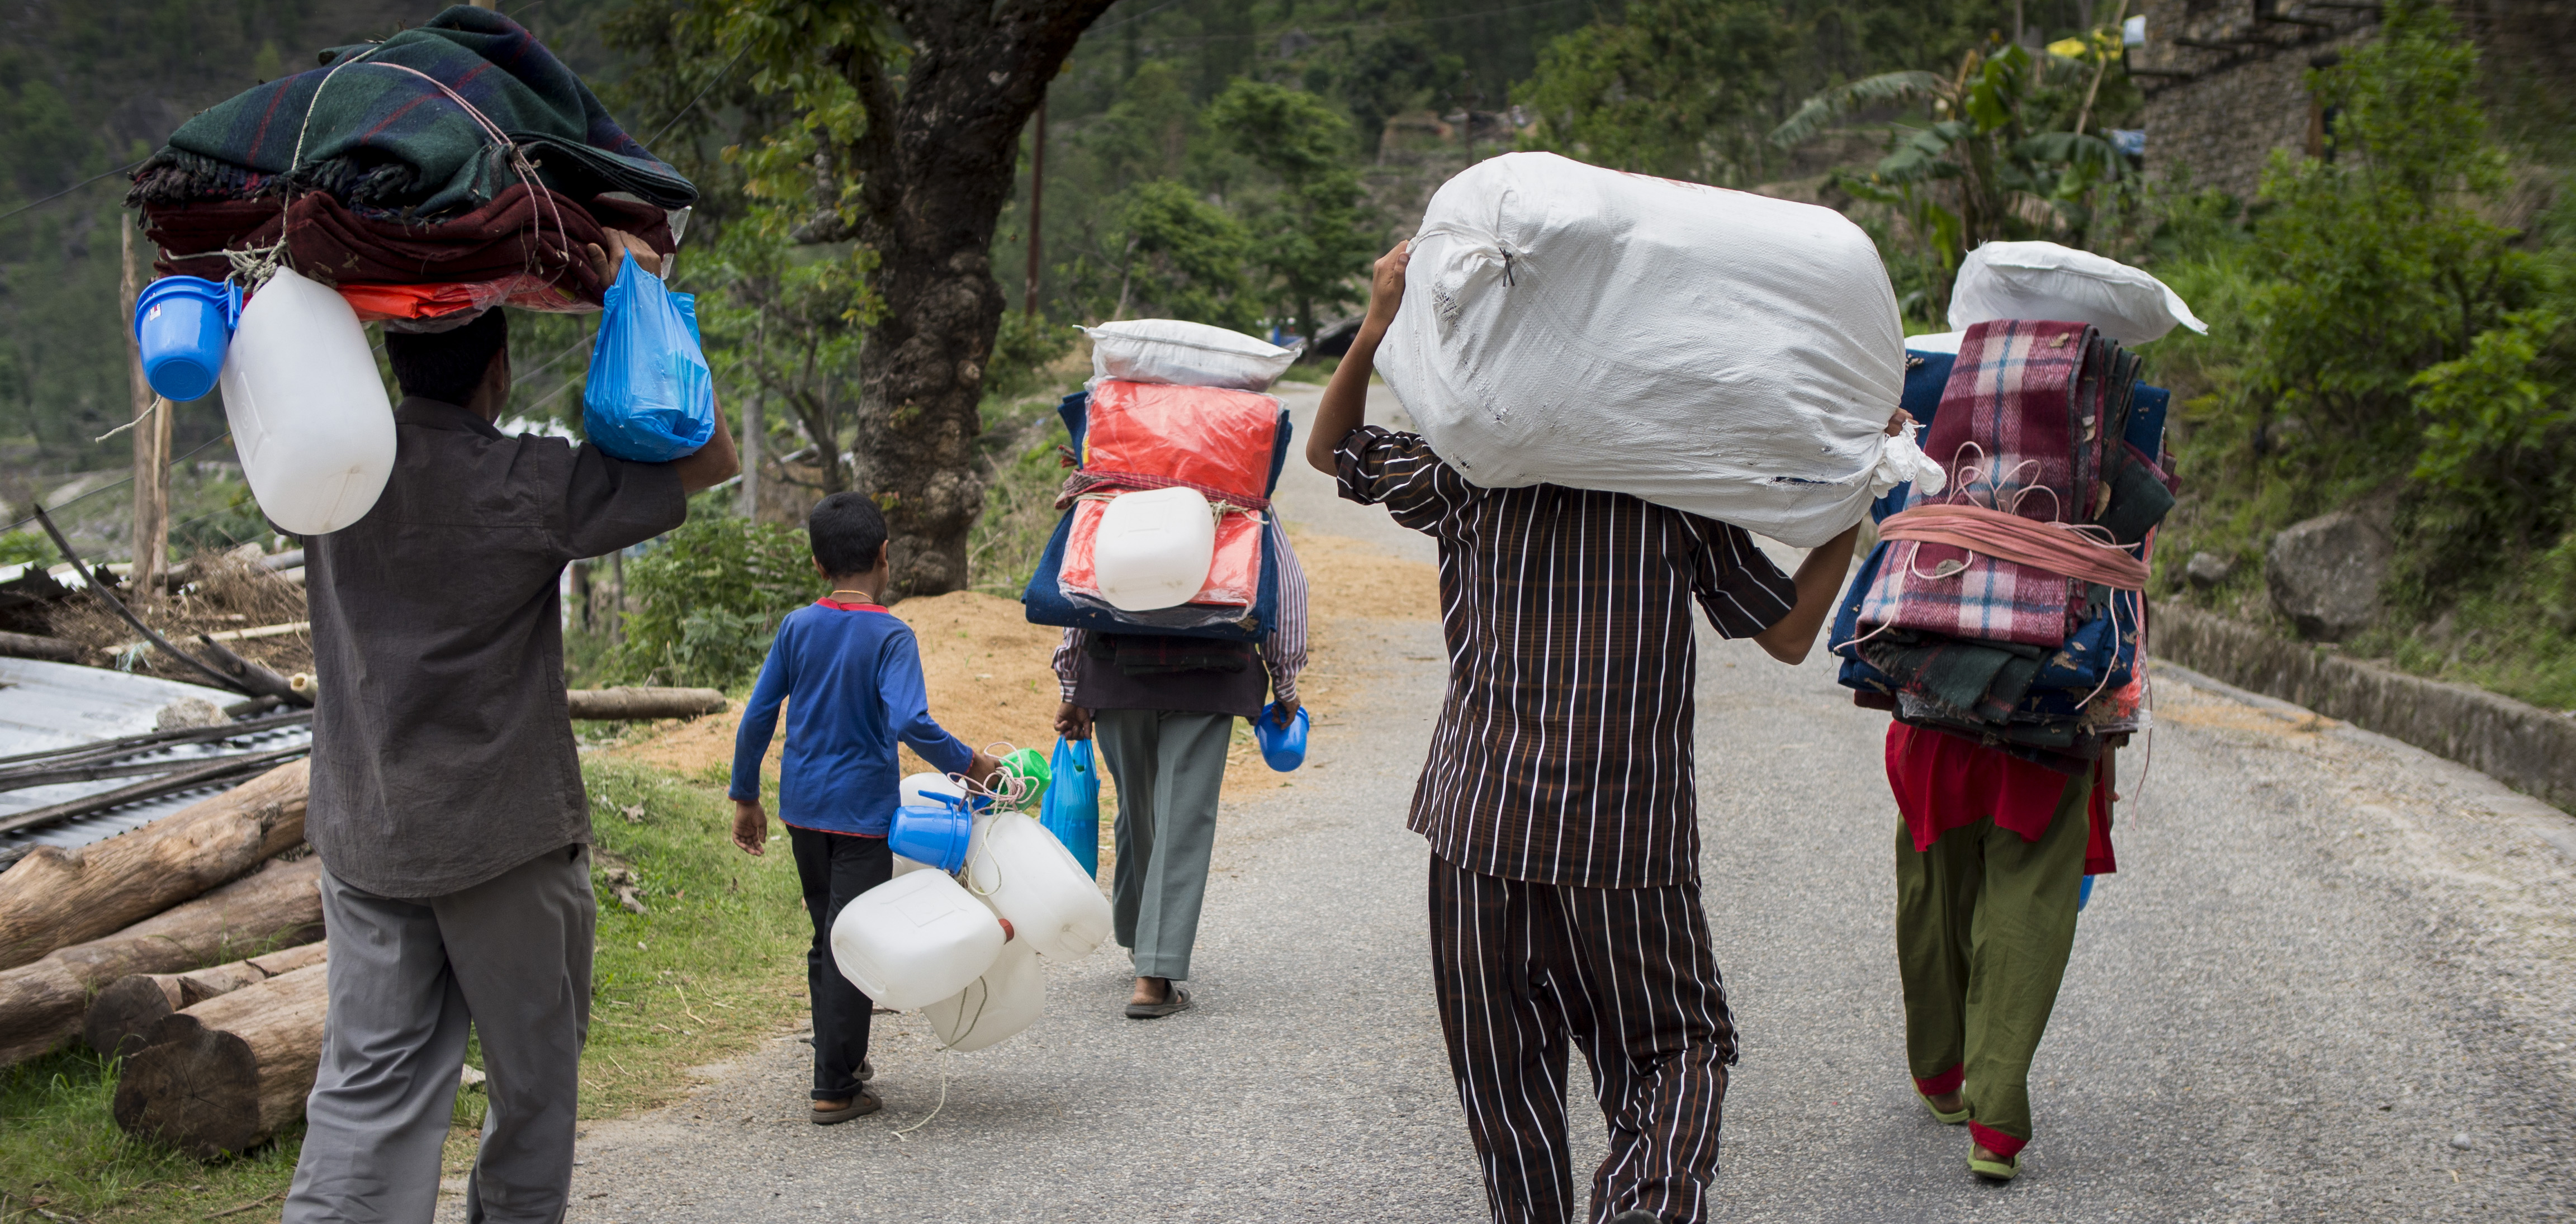 A group of Nepalis displaced by the 2015 earthquake walk away from the camera carrying emergency supplies. 